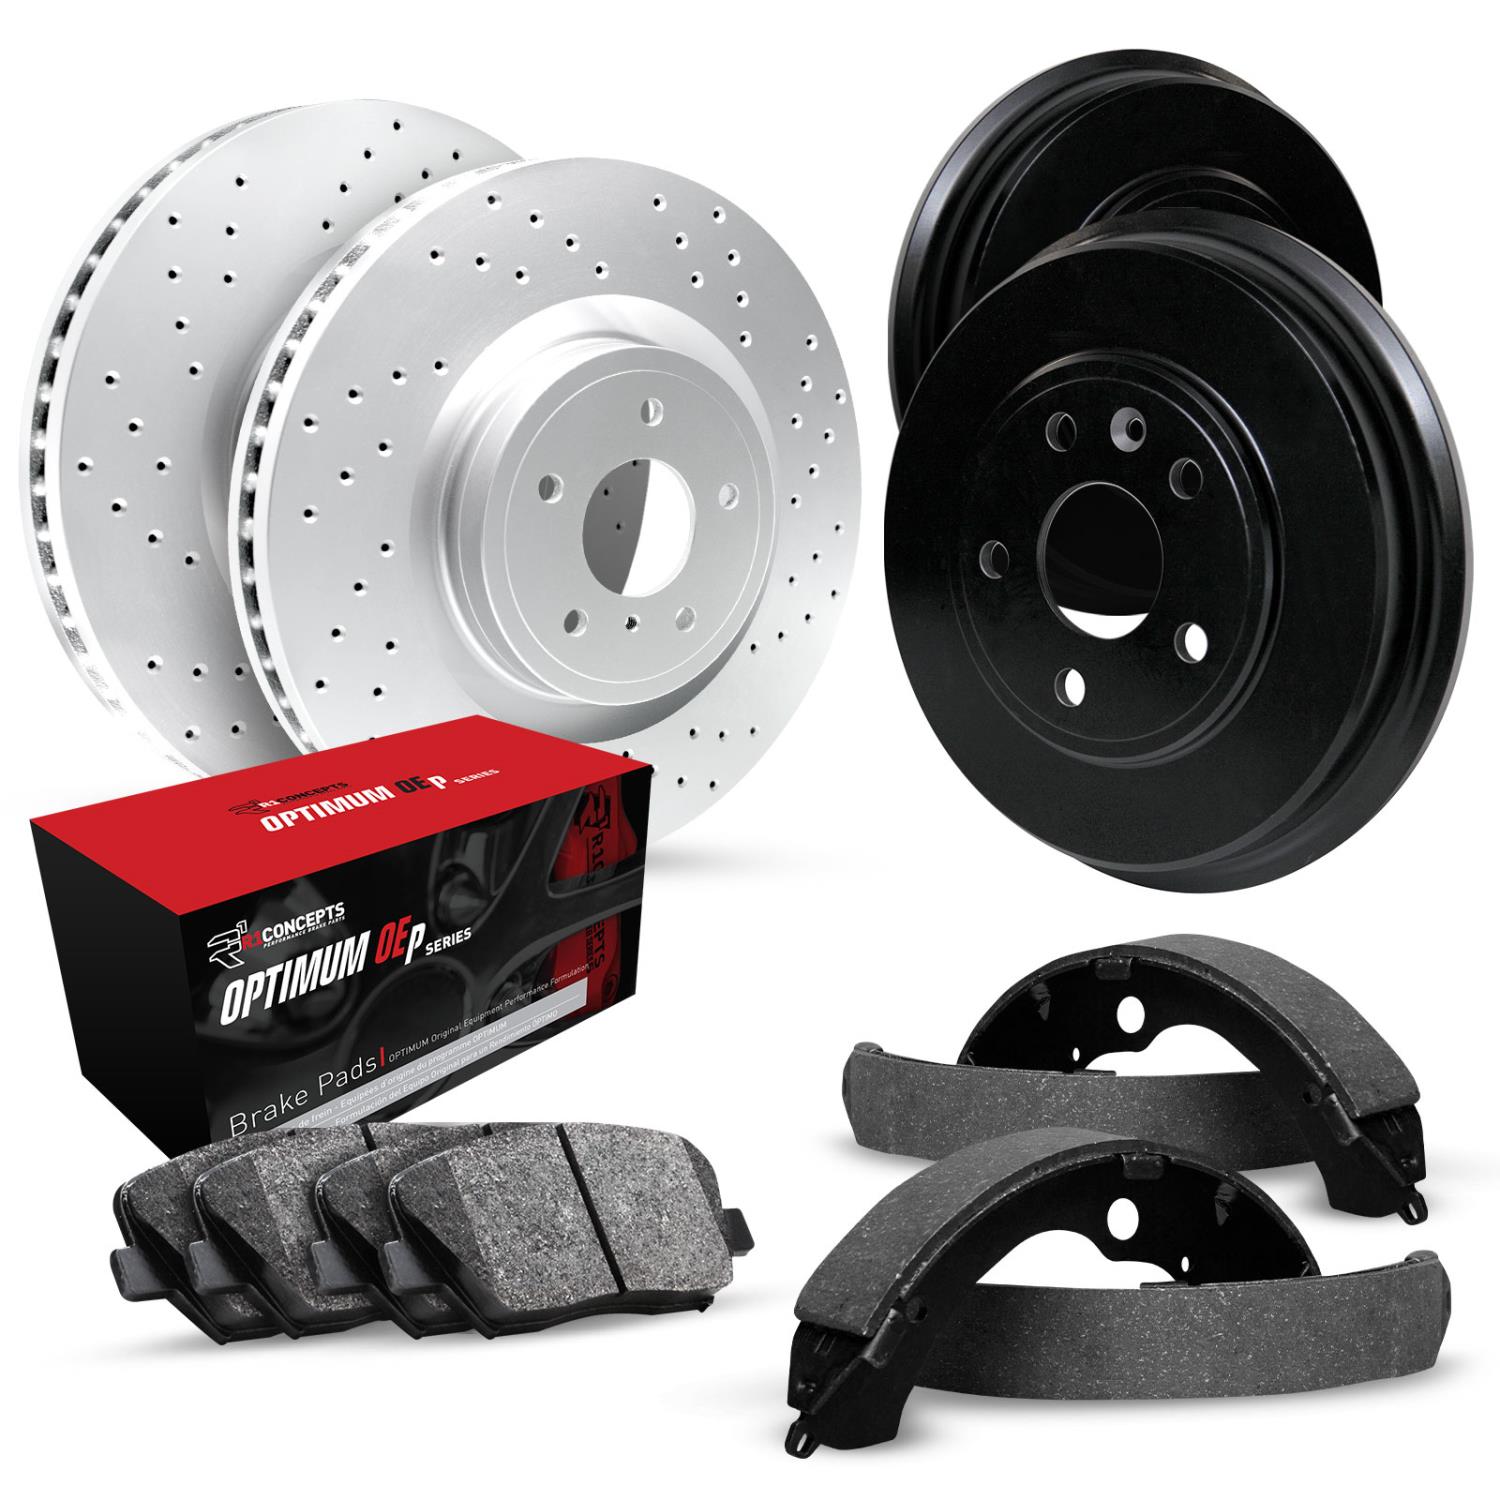 GEO-Carbon Drilled Brake Rotor & Drum Set w/Optimum OE Pads & Shoes, 2002-2005 Mitsubishi, Position: Front & Rear